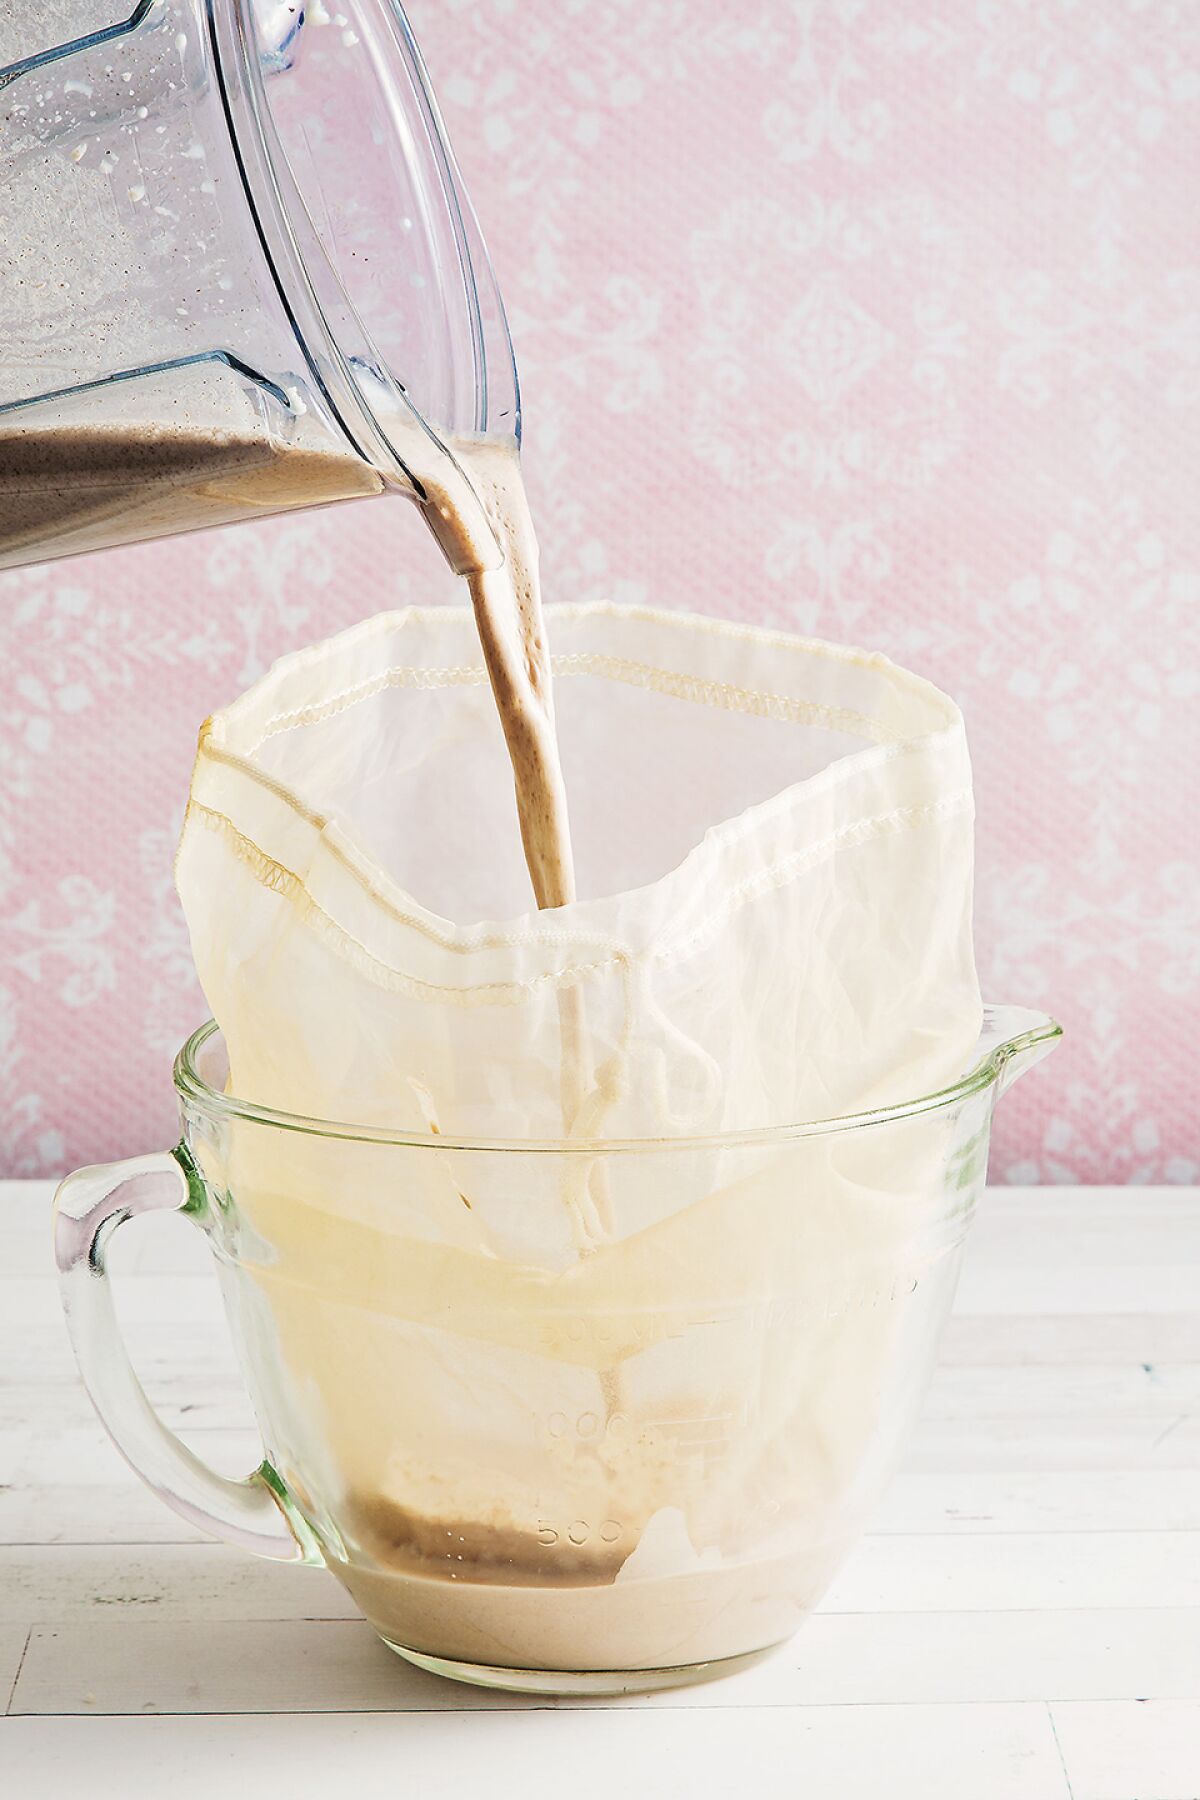 If you’re using a high-powered blender, a nut milk bag for straining the pulverized rice works better than cheesecloth.